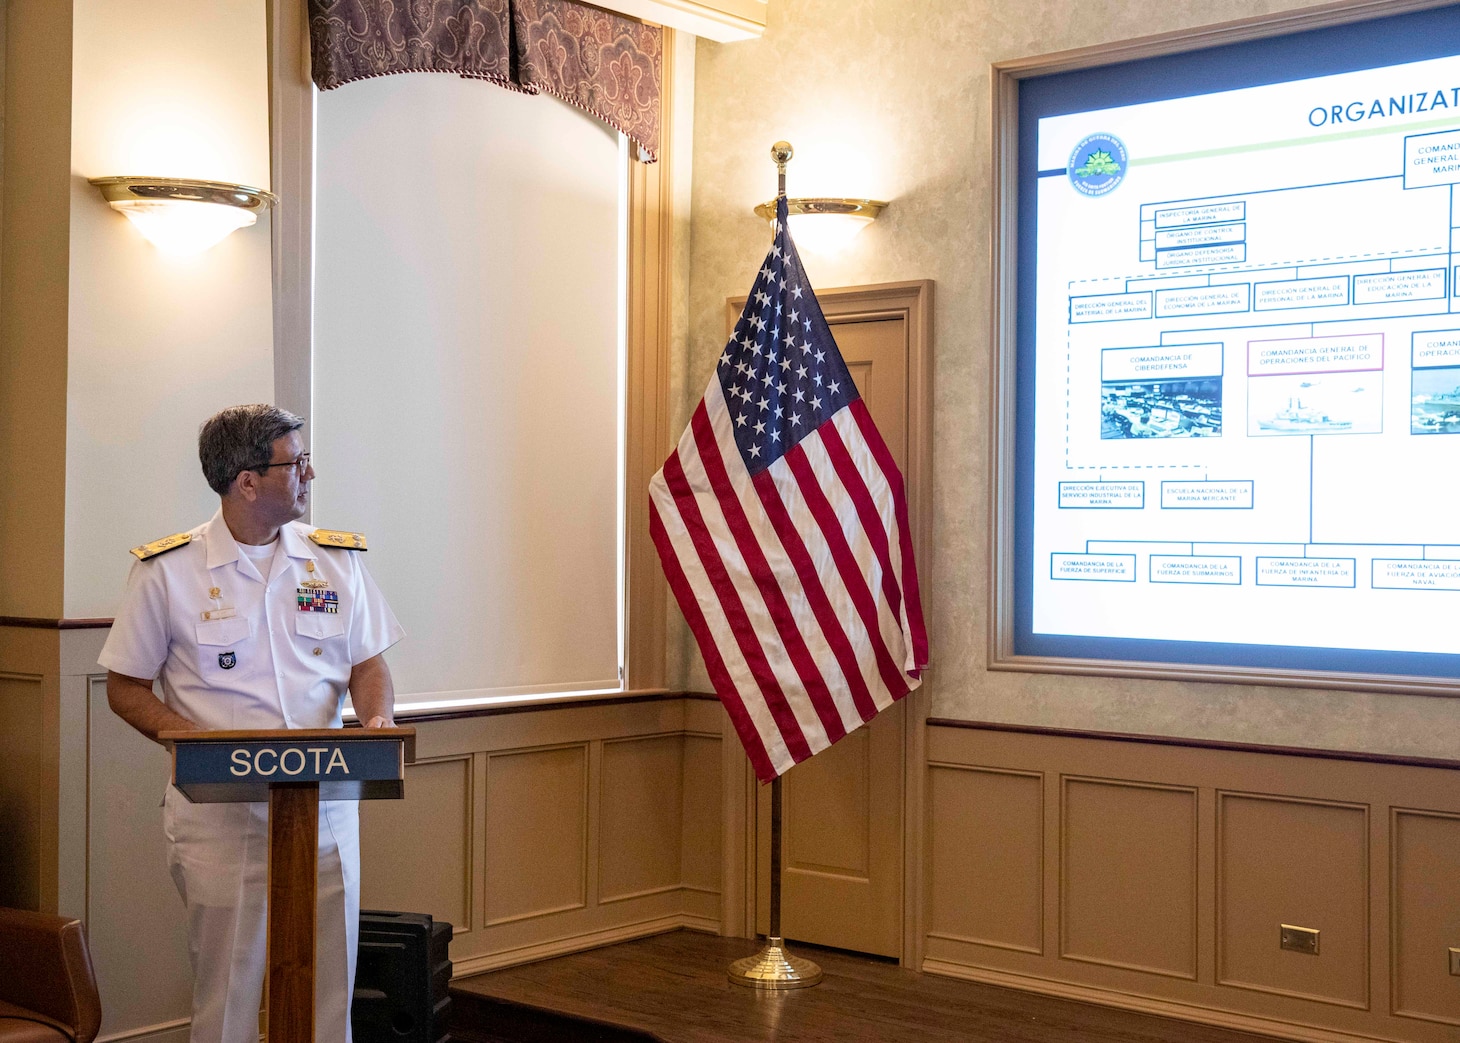 Rear Adm. Carlos Alfonso Saz Garcia, commander, Submarine Forces, Peruvian navy, conducts a presentation during the inaugural Submarine Conference of the Americas (SCOTA) onboard Naval Station Norfolk, July 26, 2022.